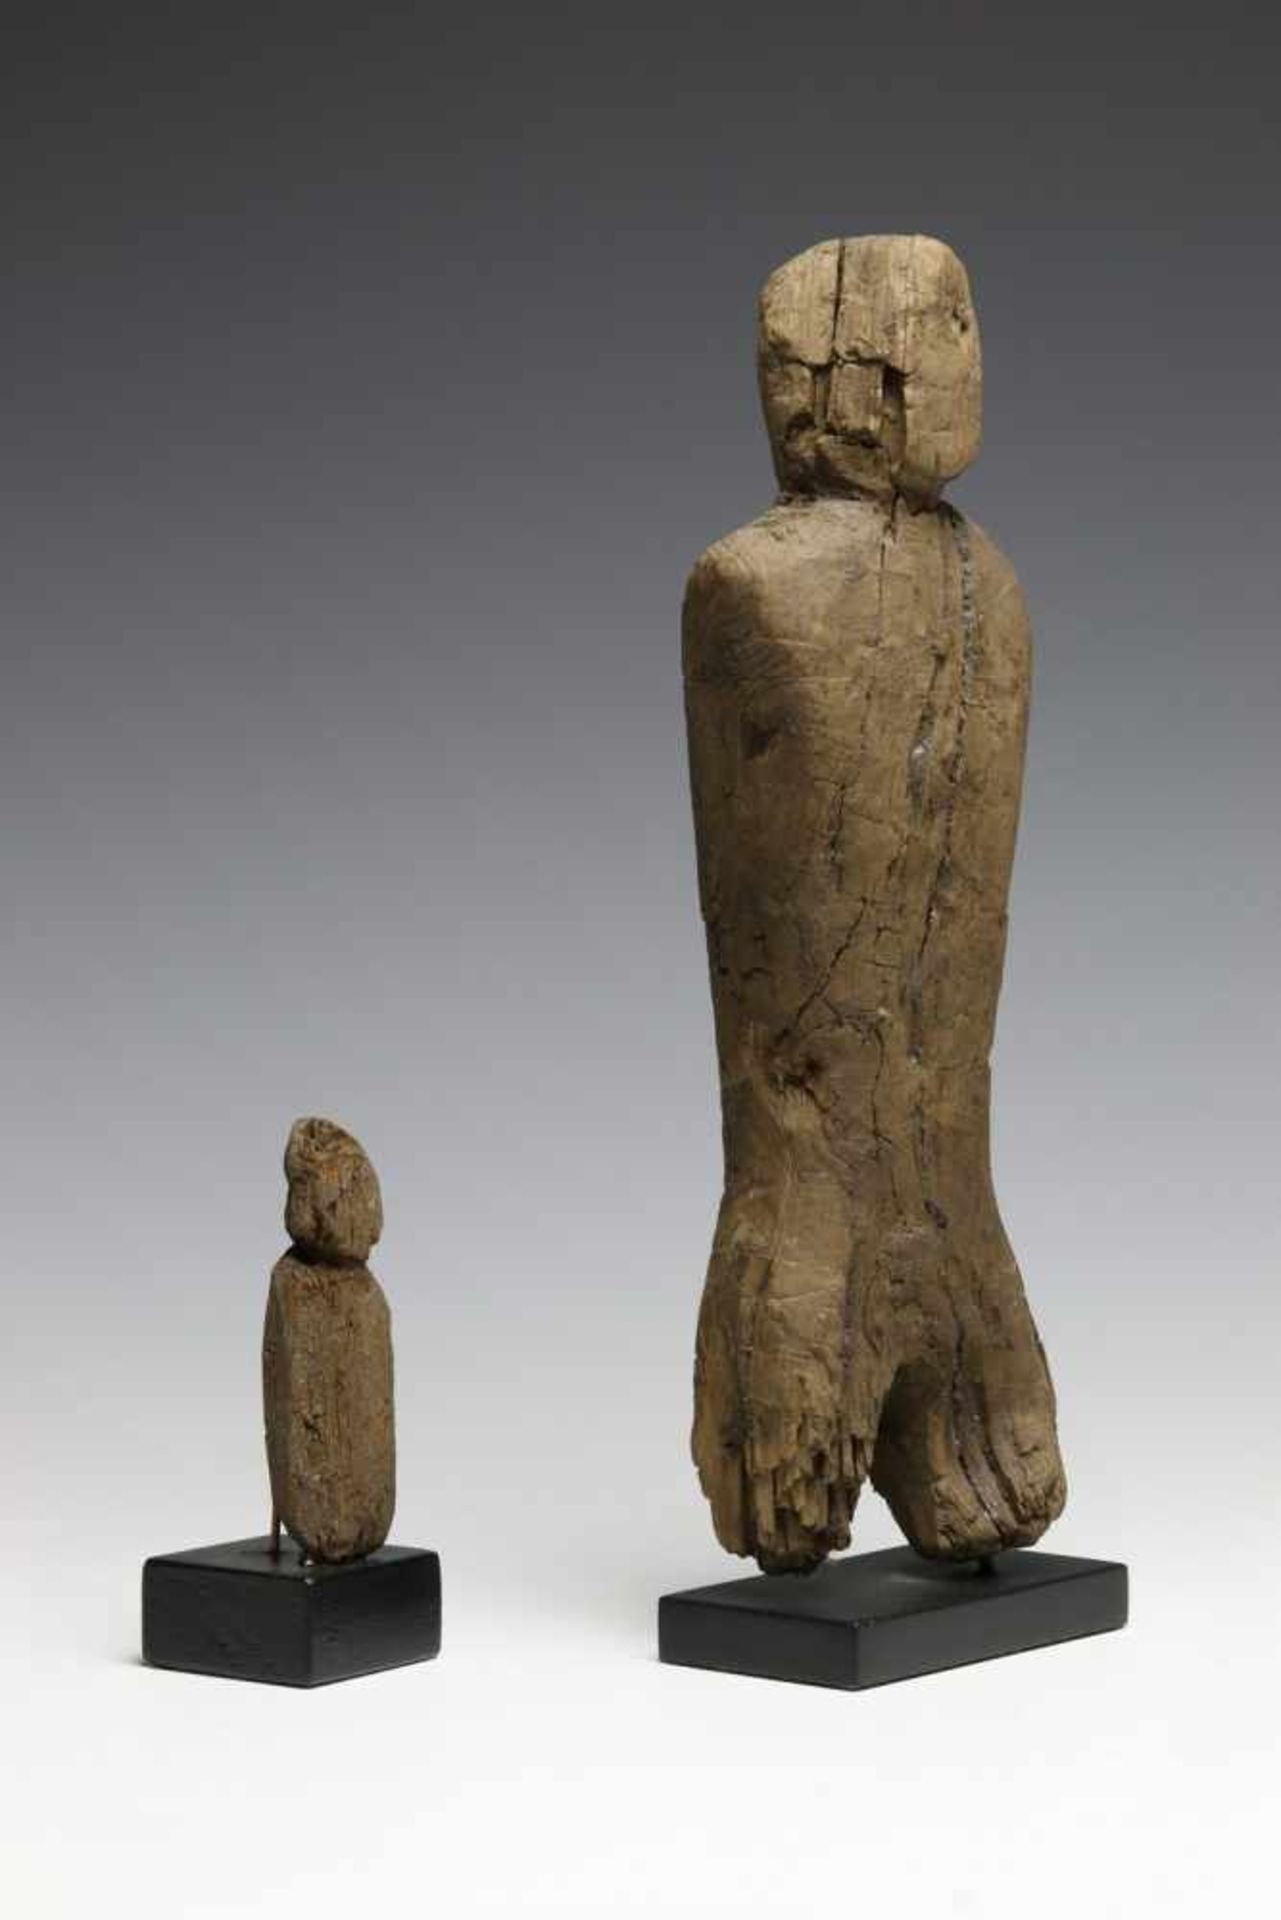 Arctic Circle, Thule Culture, two driftwood anthropomorphic figuresProvenance, auction of Lord